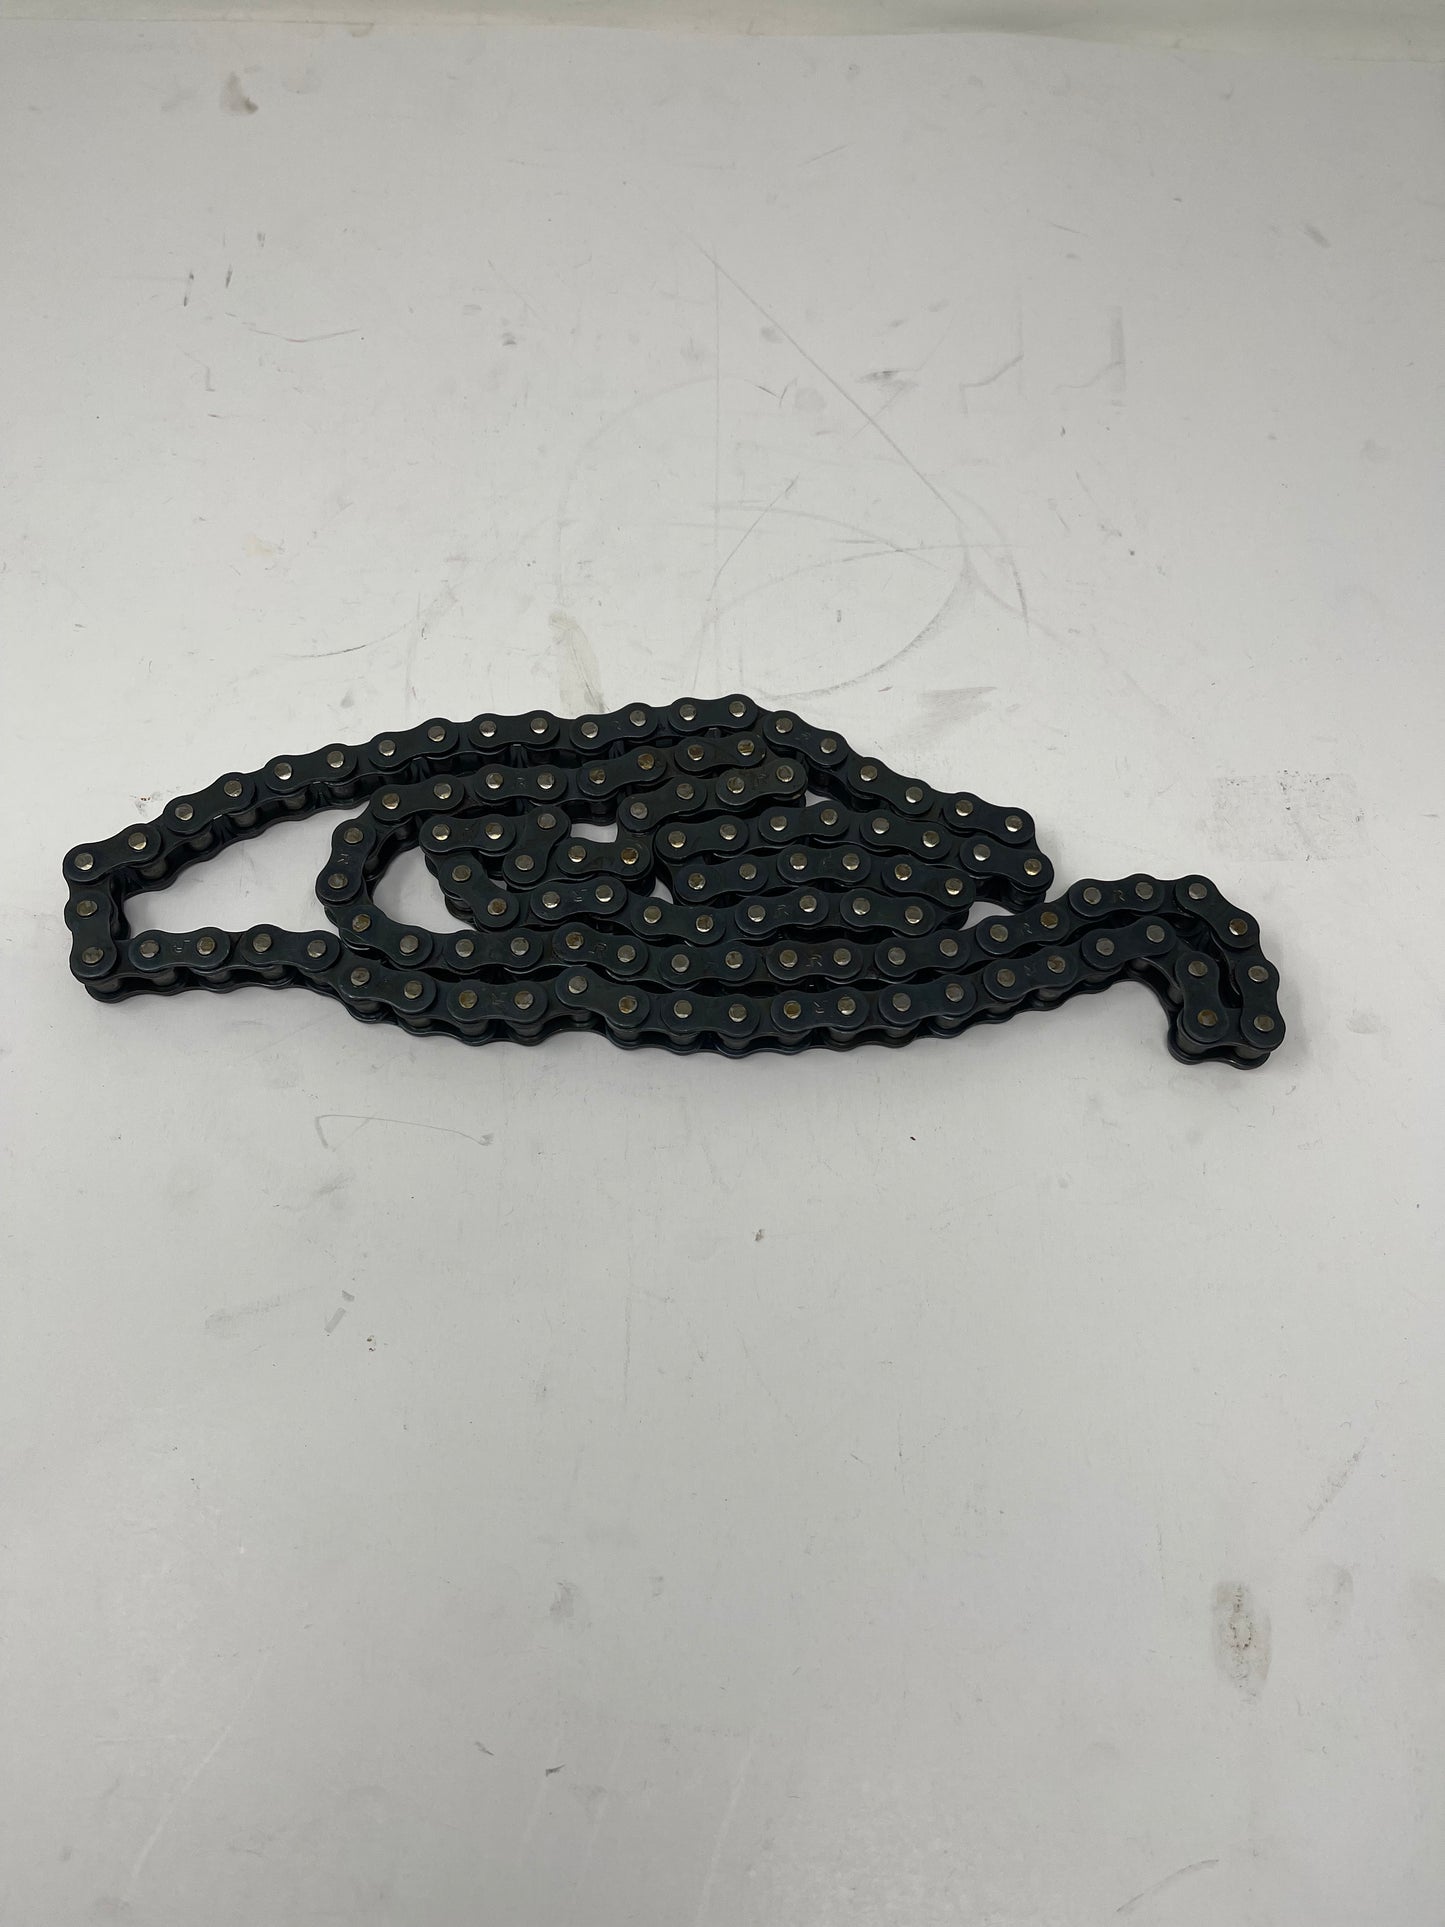 Chain for BD125-10. Buy parts for Xpro Ninja clone bike